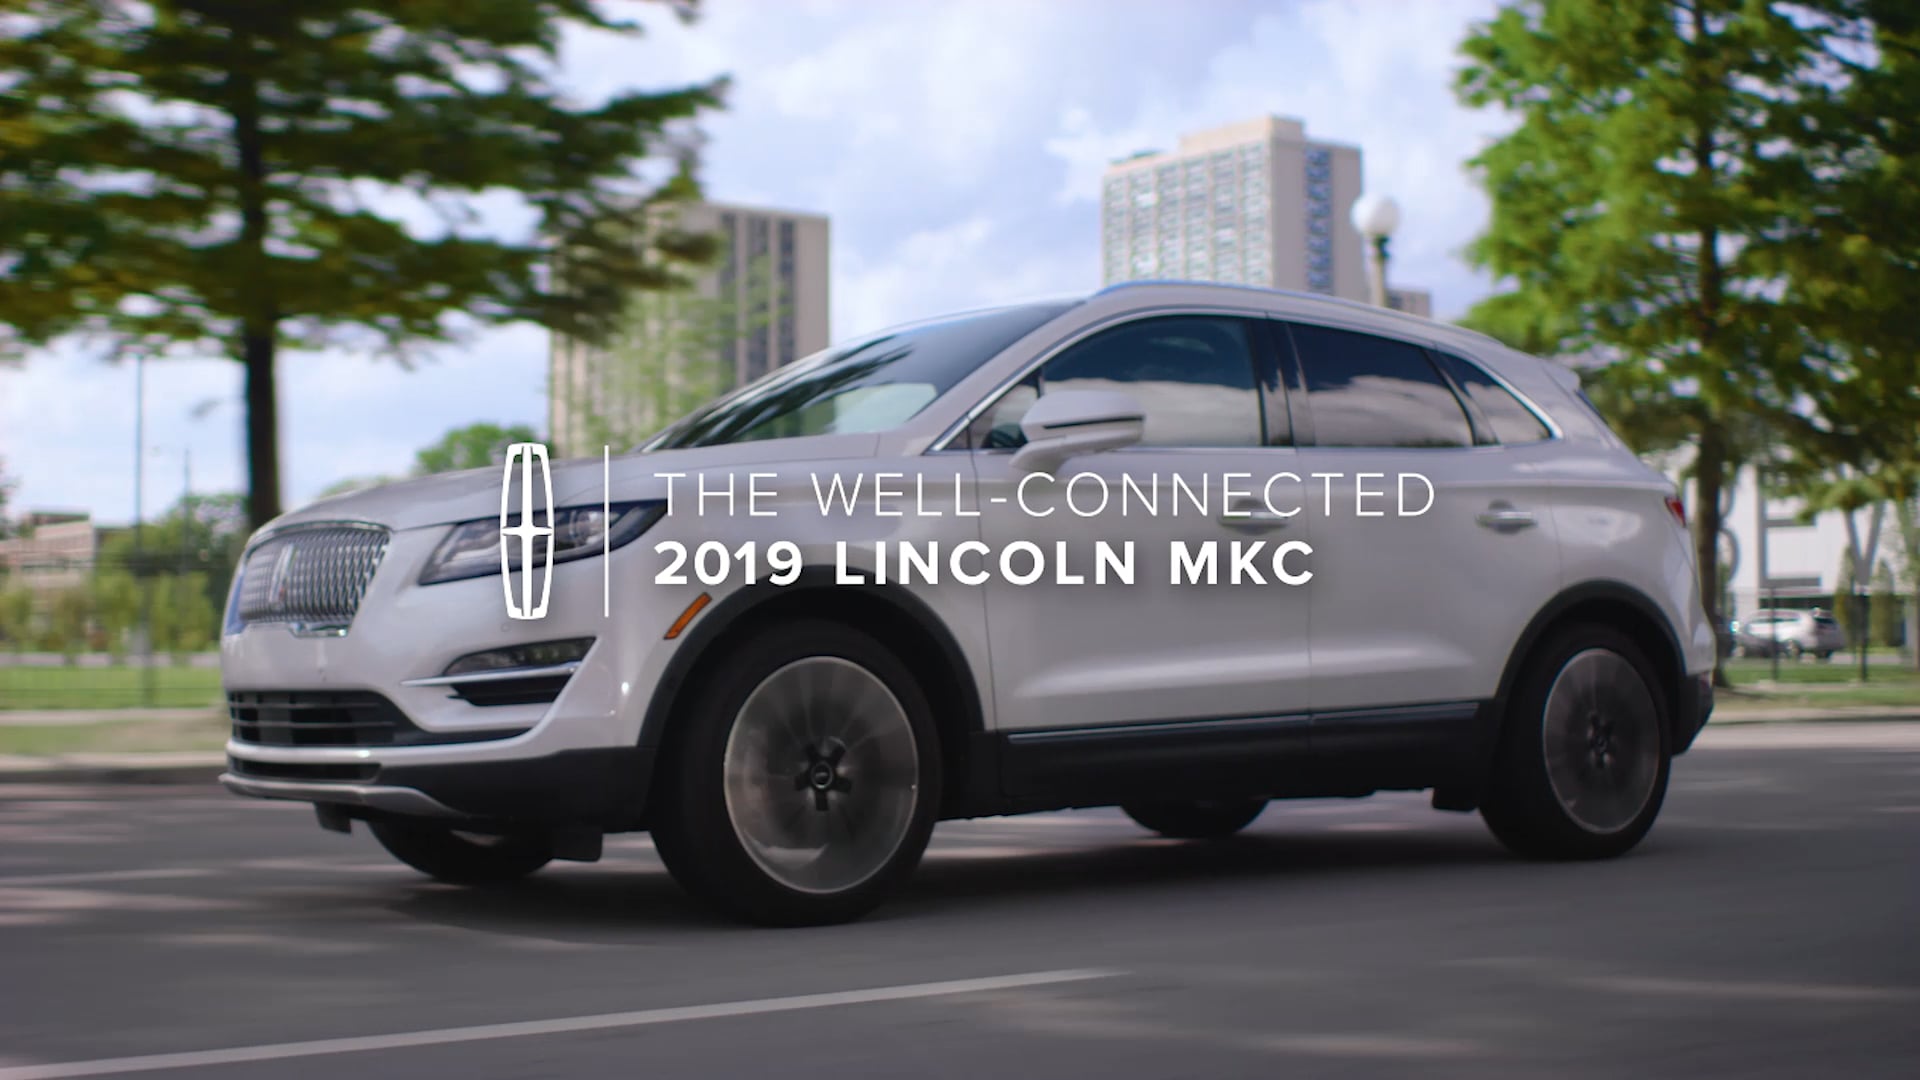 2019 Lincoln MKC: "A New Perspective"